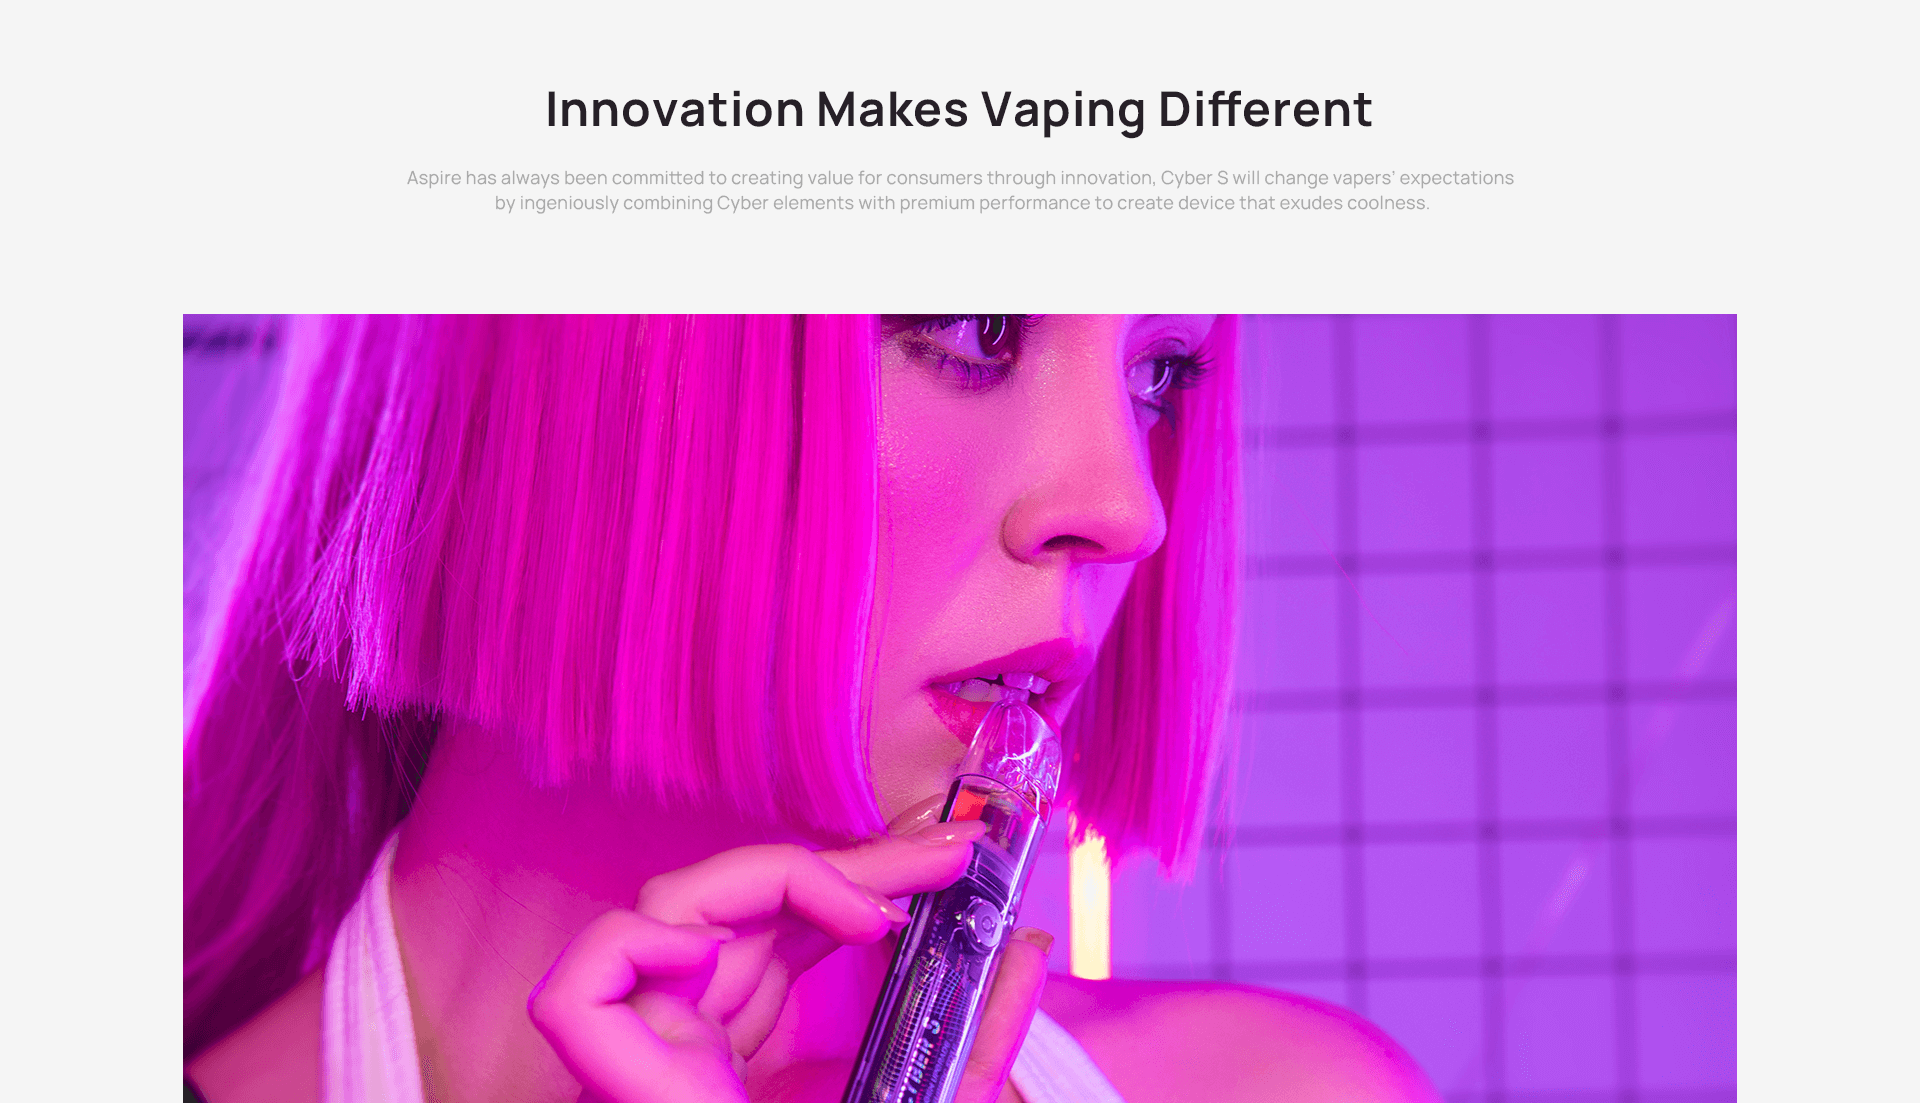 Aspire Cyber S | 'Innovation Makes Vaping Different'